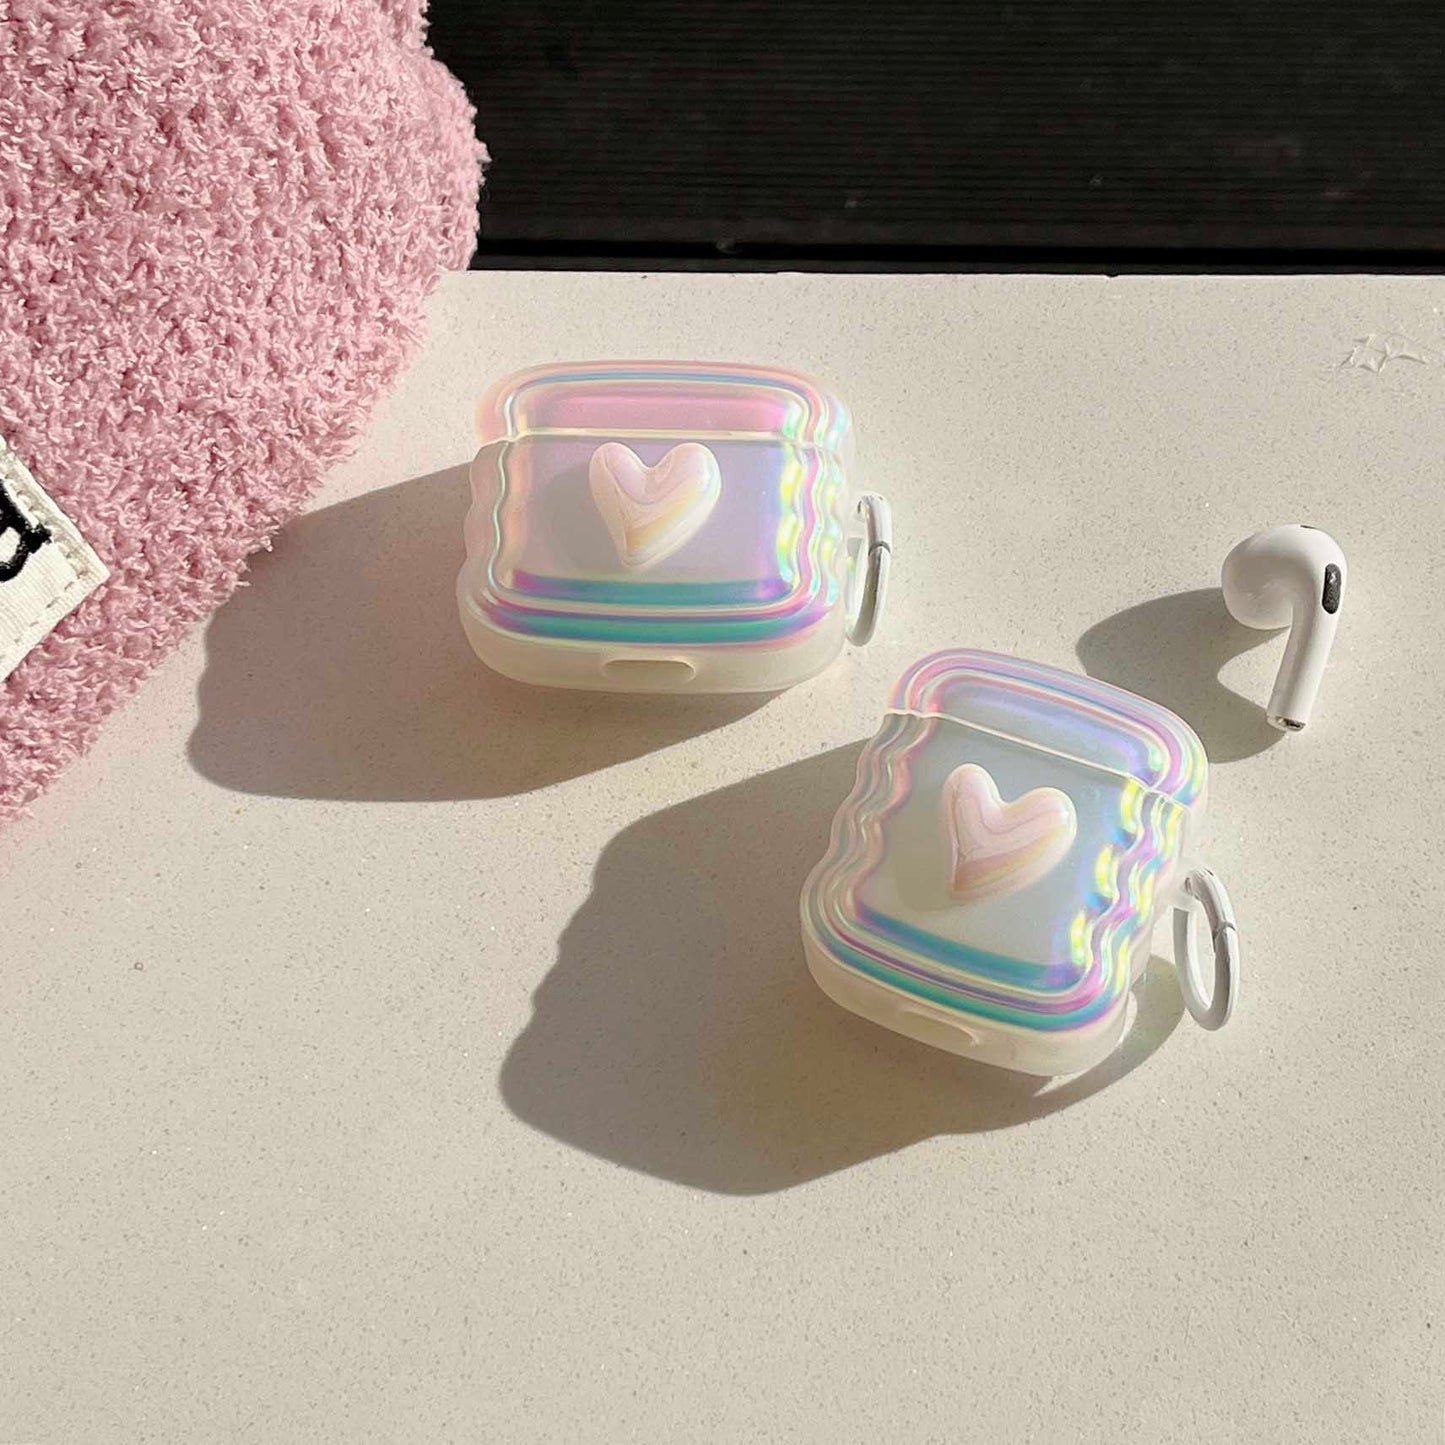 Translucent Wavy Heart AirPods